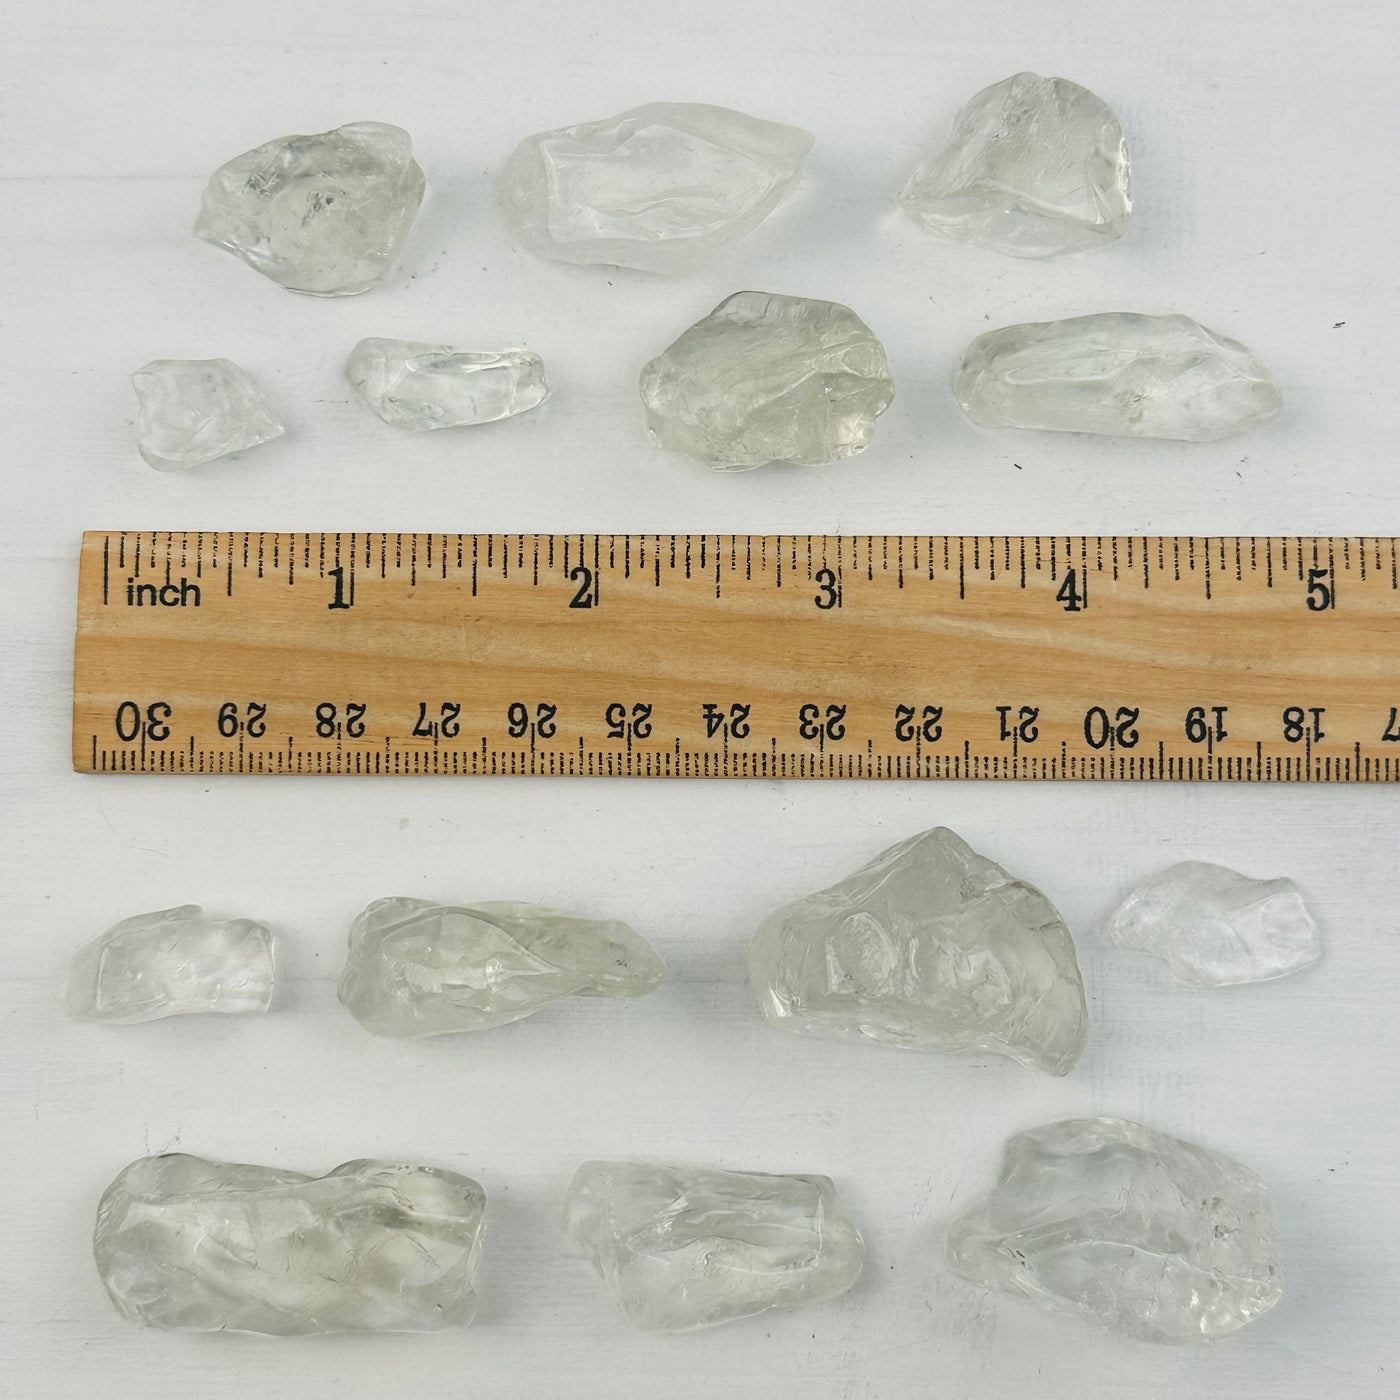 Prasiolite Polished Pieces next to a ruler for size reference 